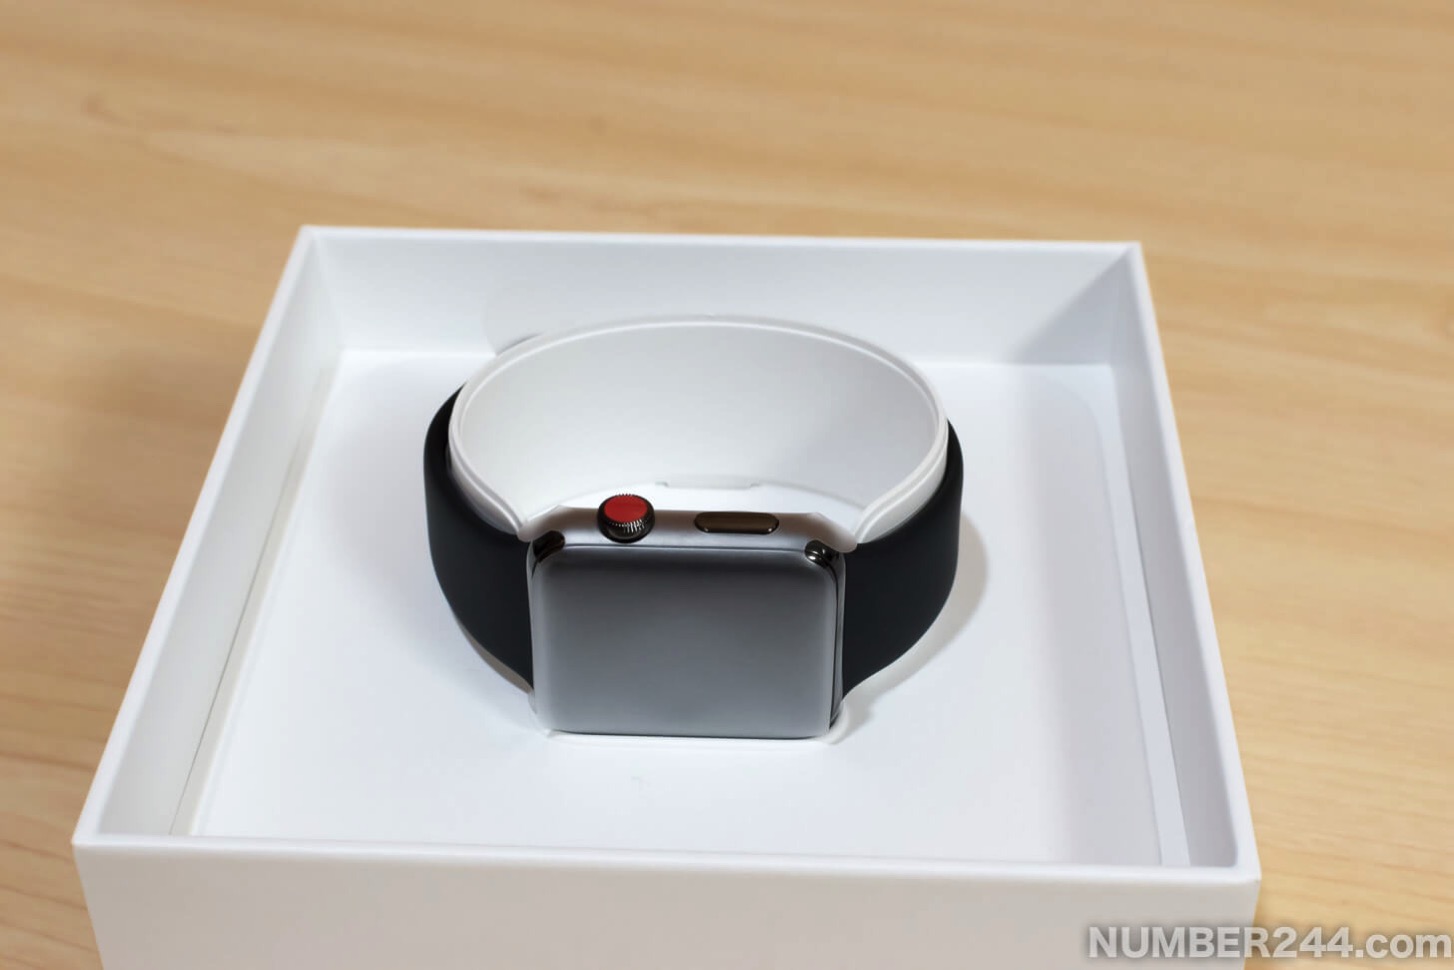 Apple Watch Series 3 unboxing10